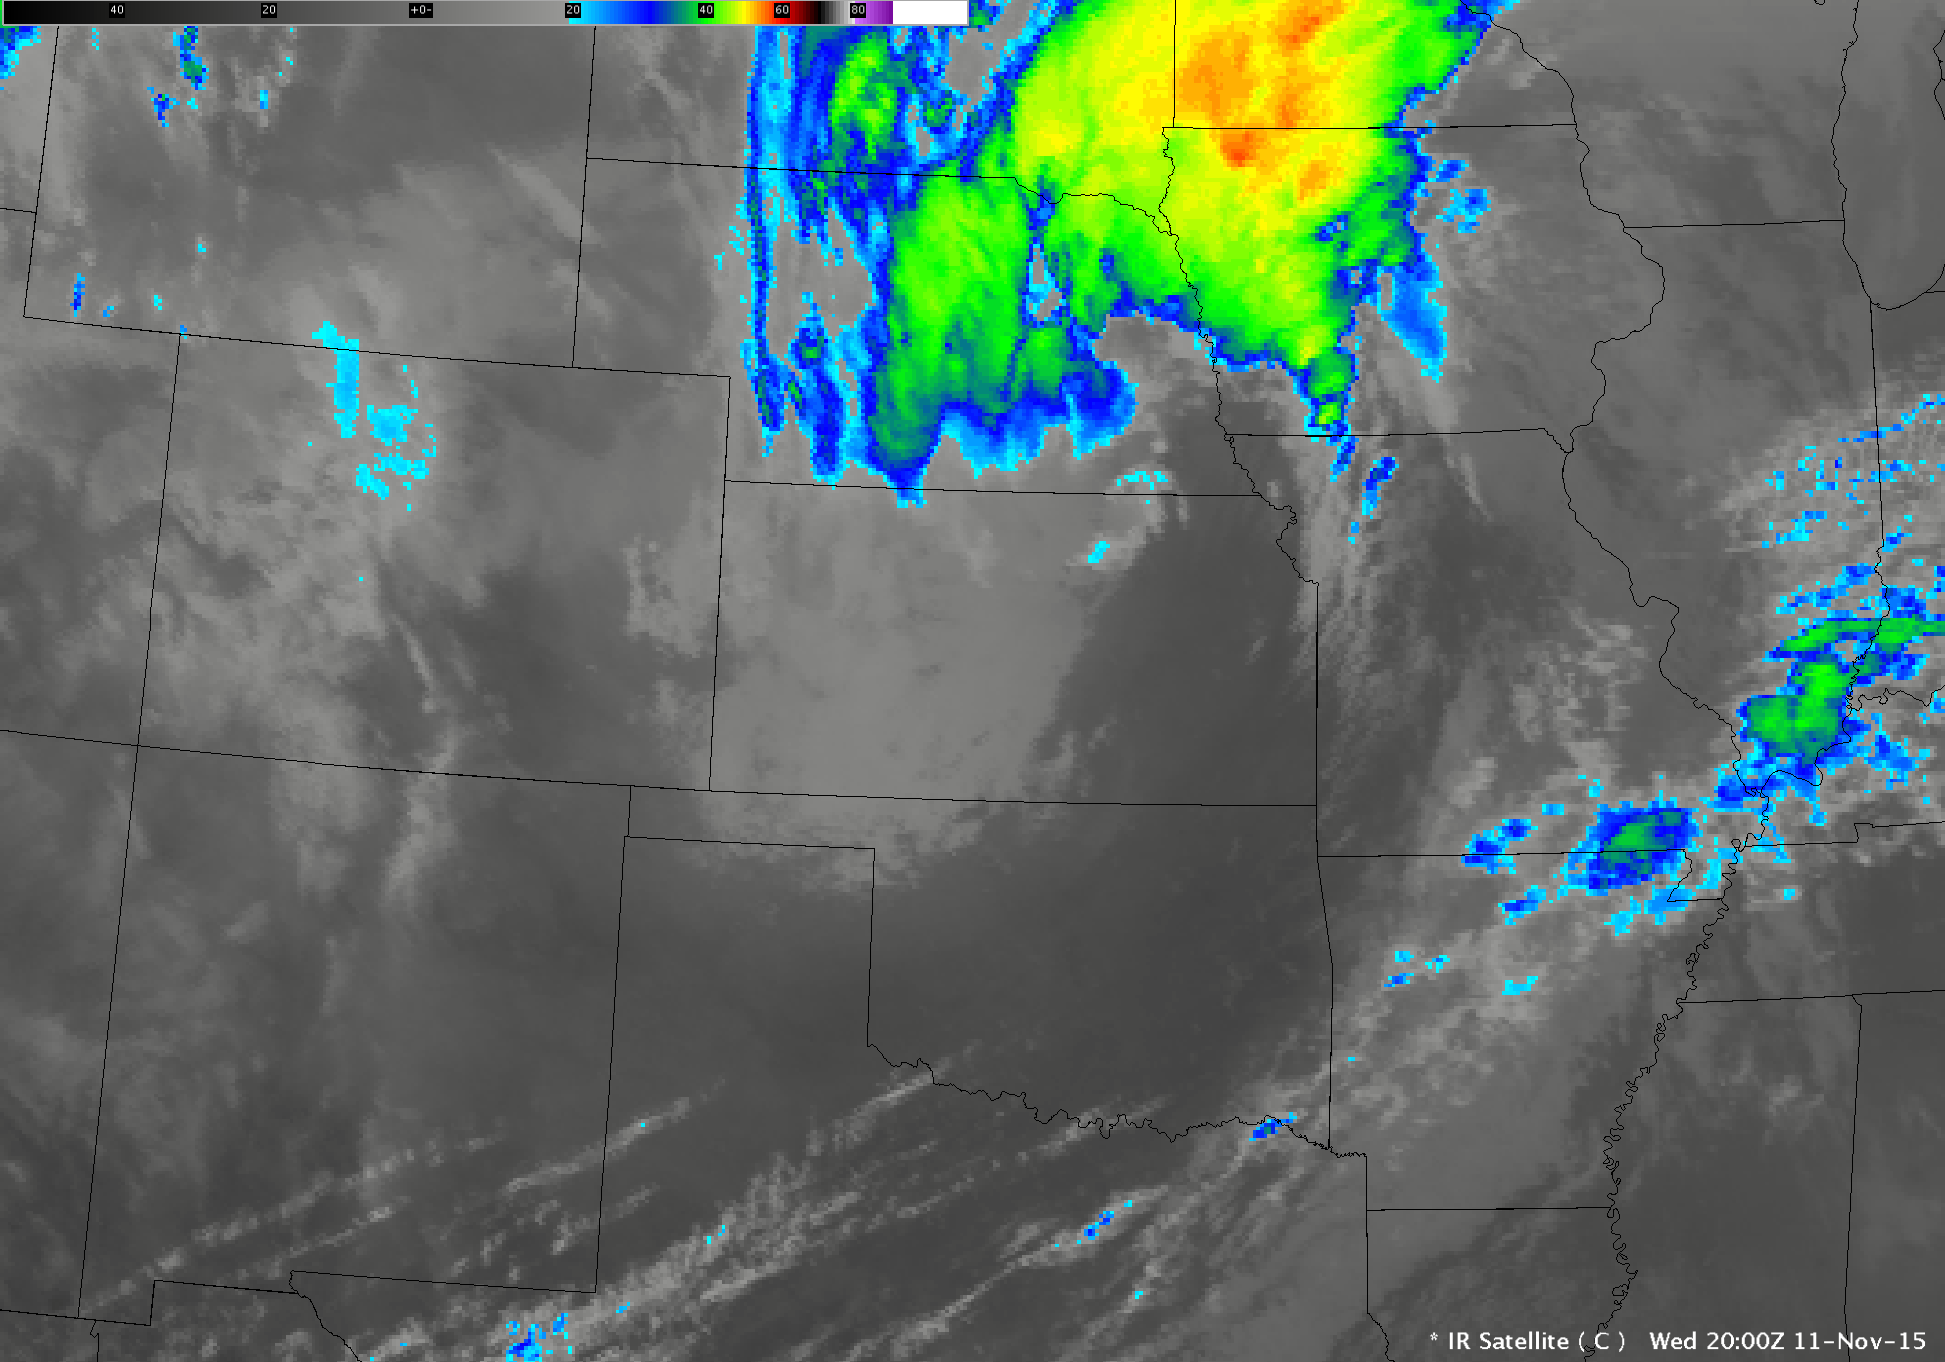 GOES-13 Infrared (10.7 µm) images [click to play animation]